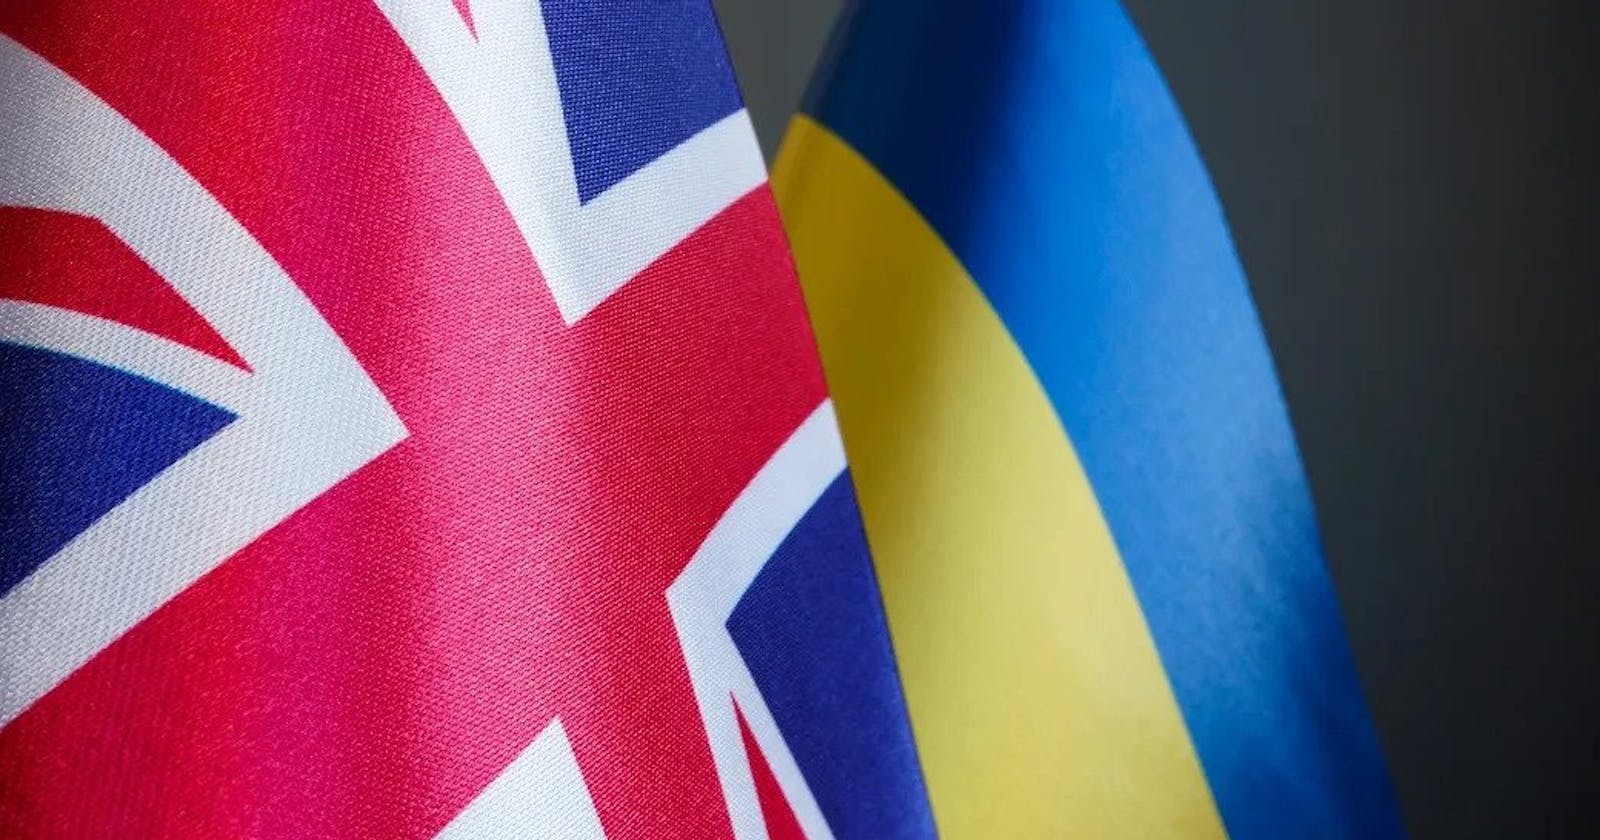 UK signs digital trade deal to support Ukraine's economy